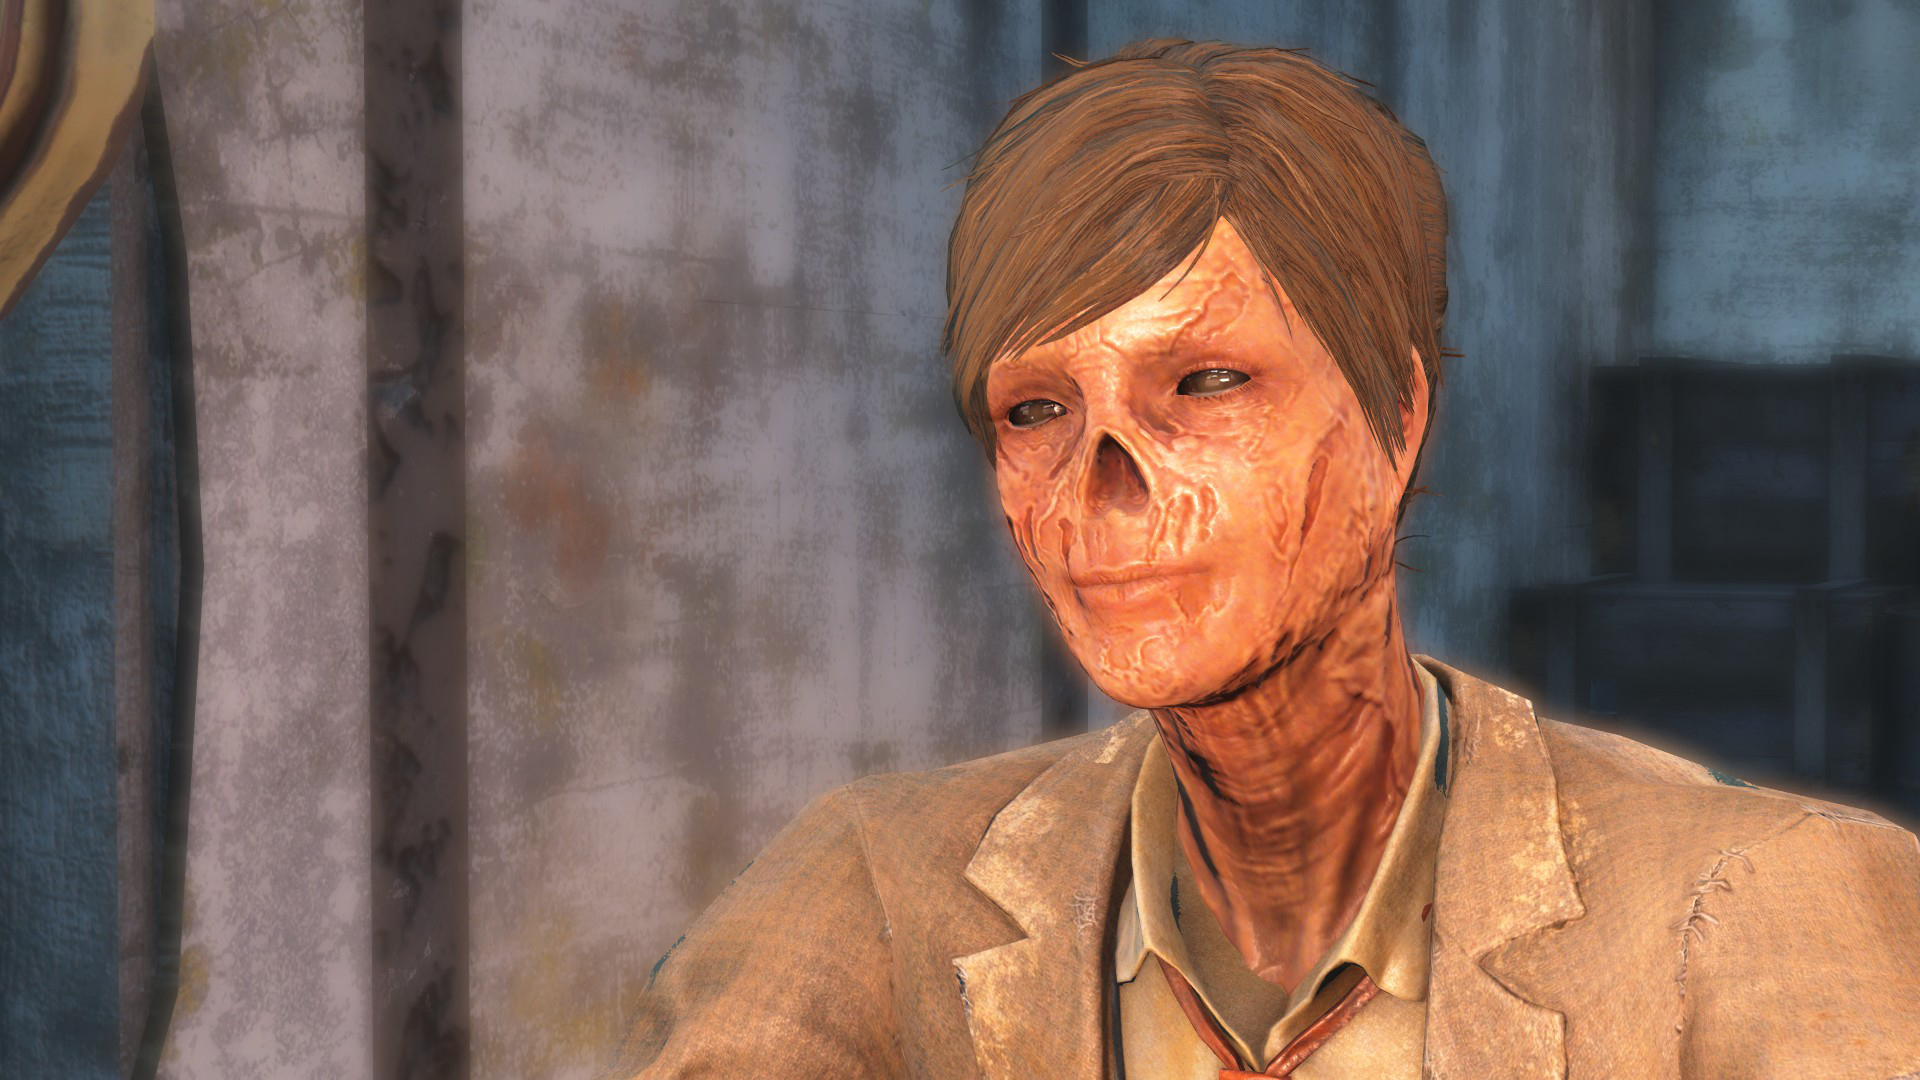 fallout 4 dating a ghoul im 19 and dating a 15 year old